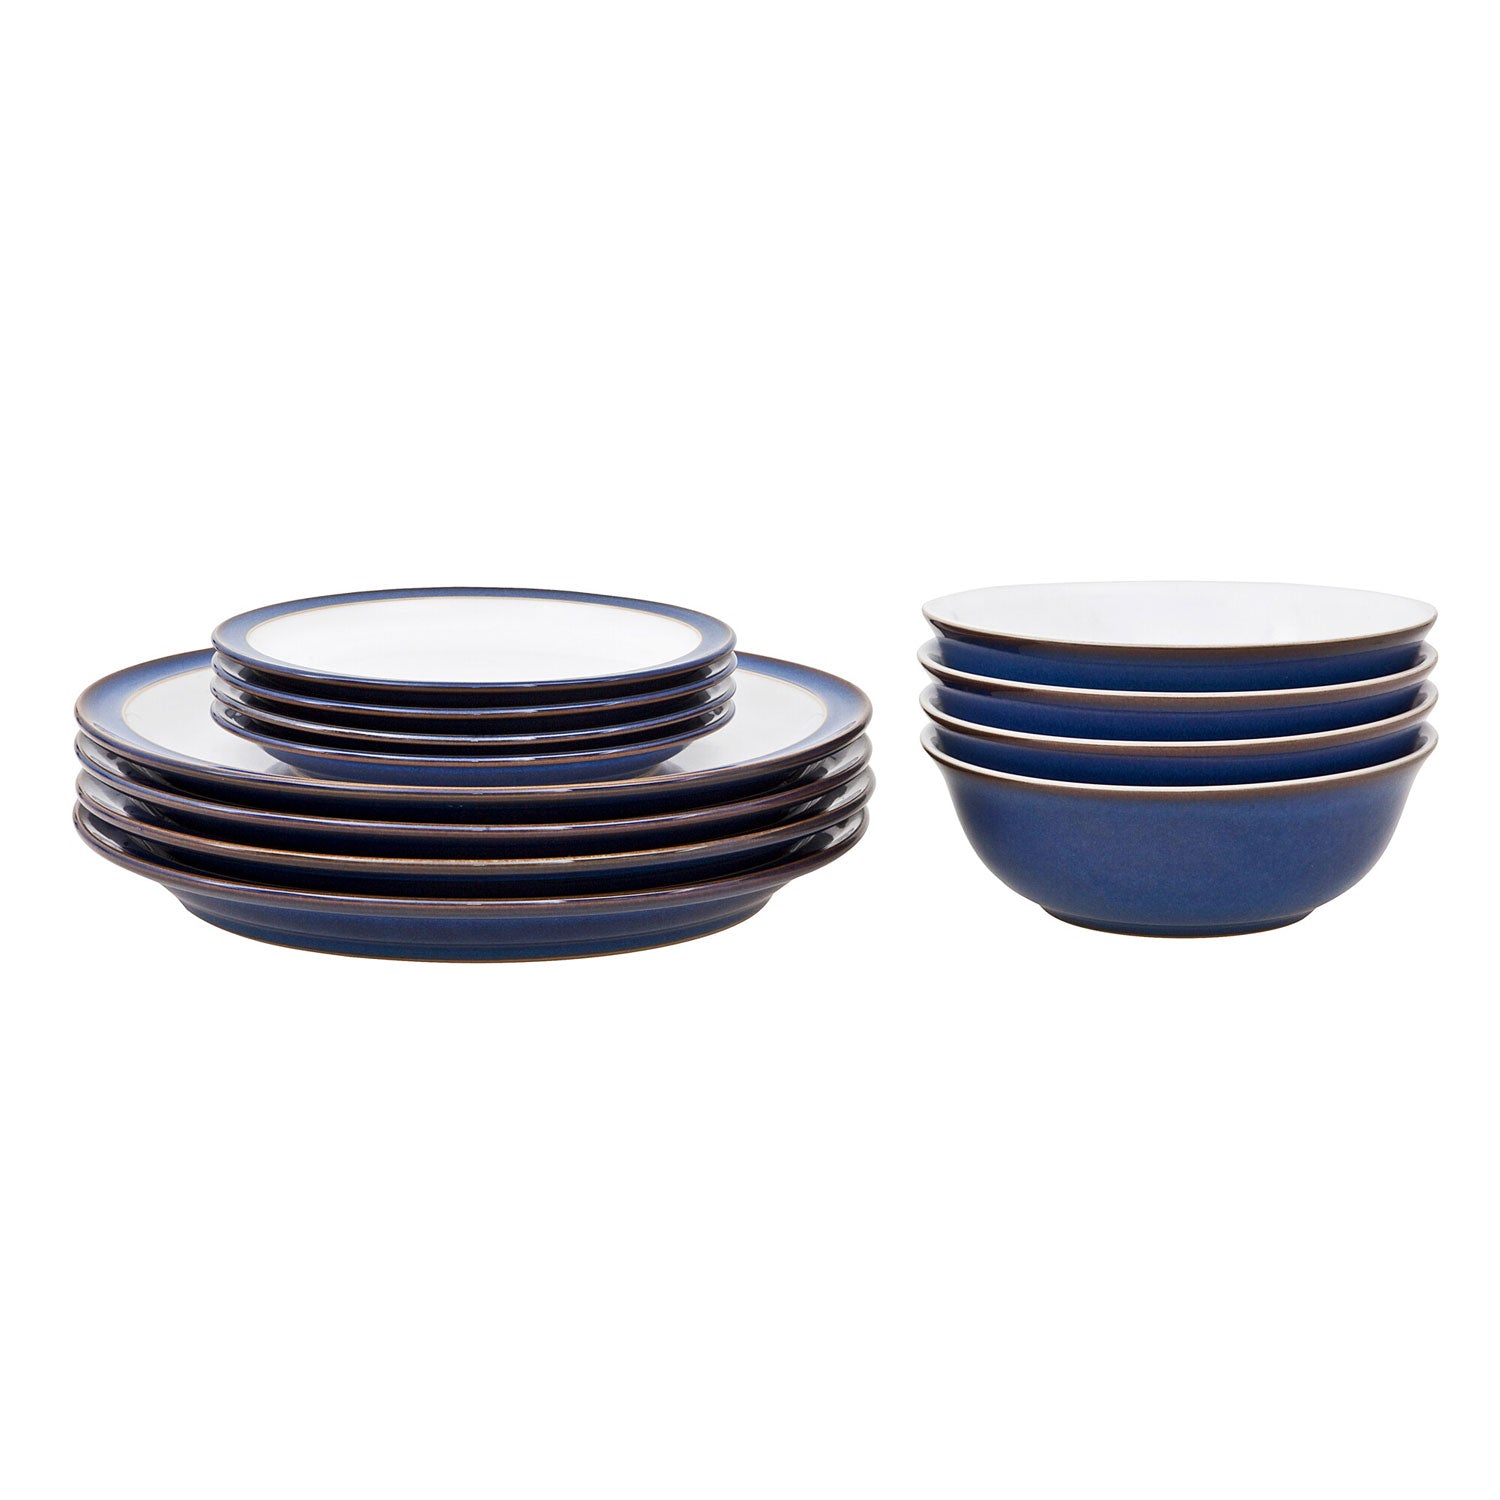 Denby 12 Piece Tableware Set - Imperial Blue 2 Shaws Department Stores